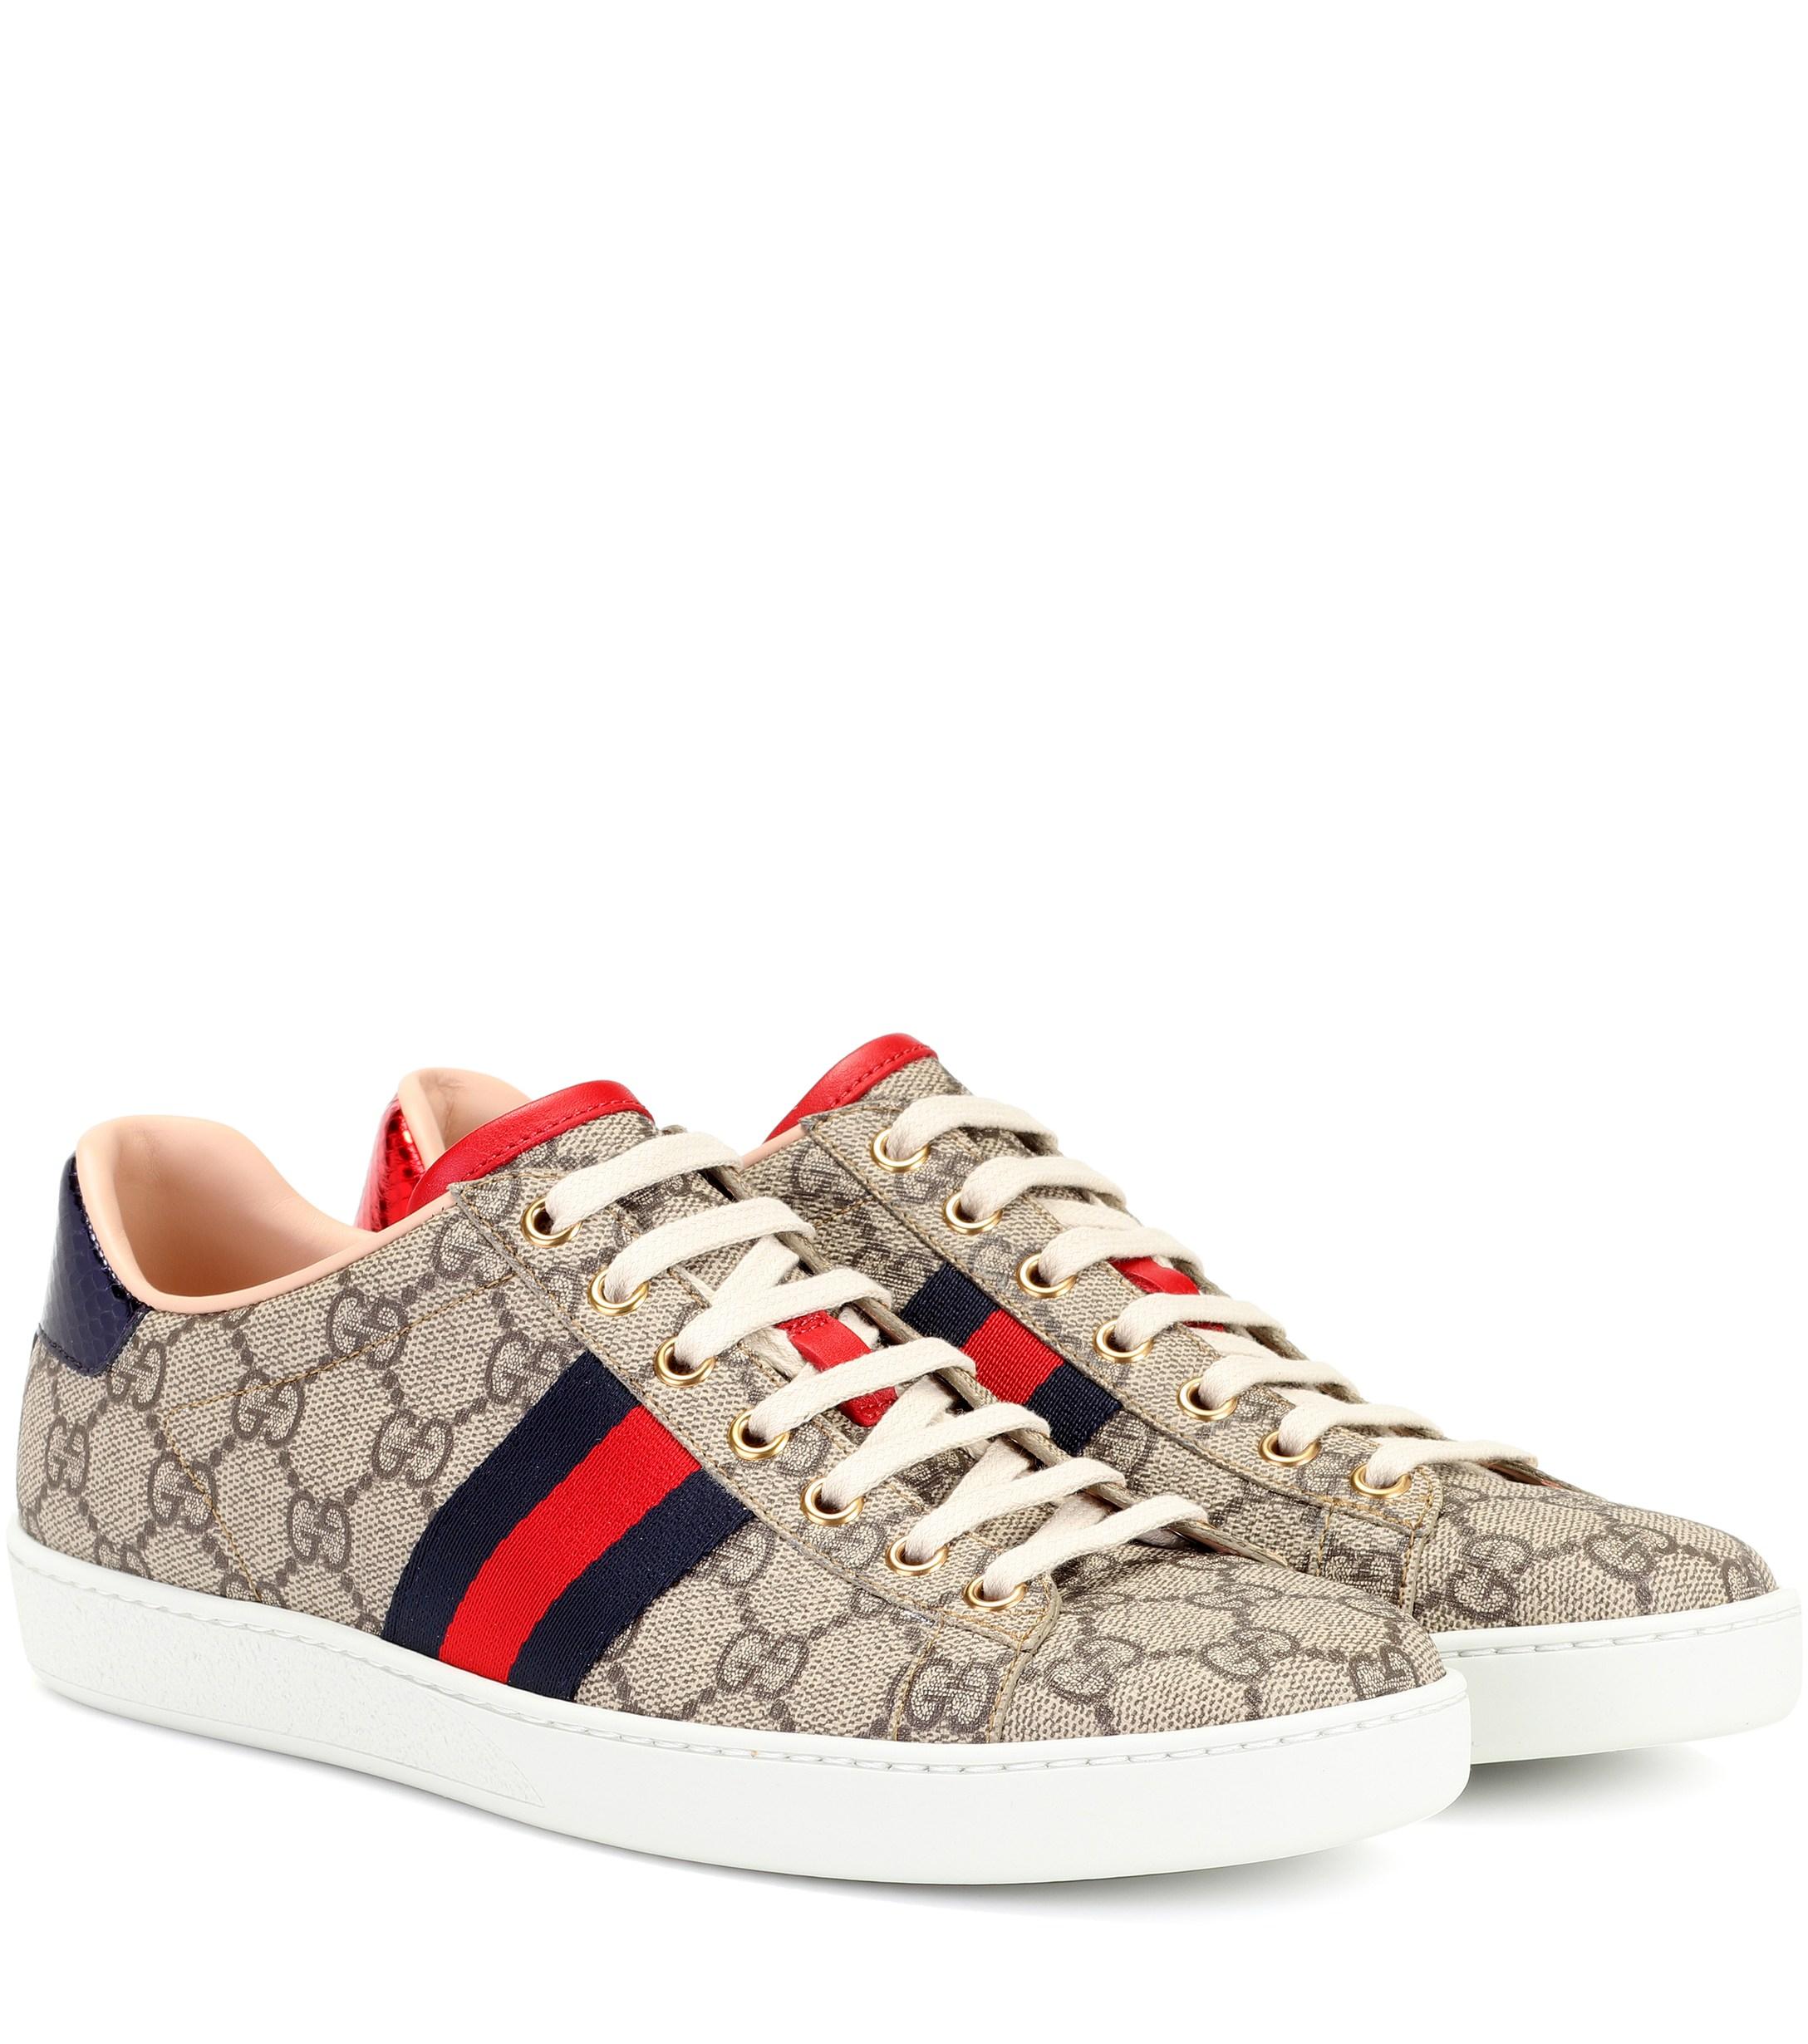 Gucci Canvas Ace GG Supreme Sneakers in Beige (Natural) - Lyst